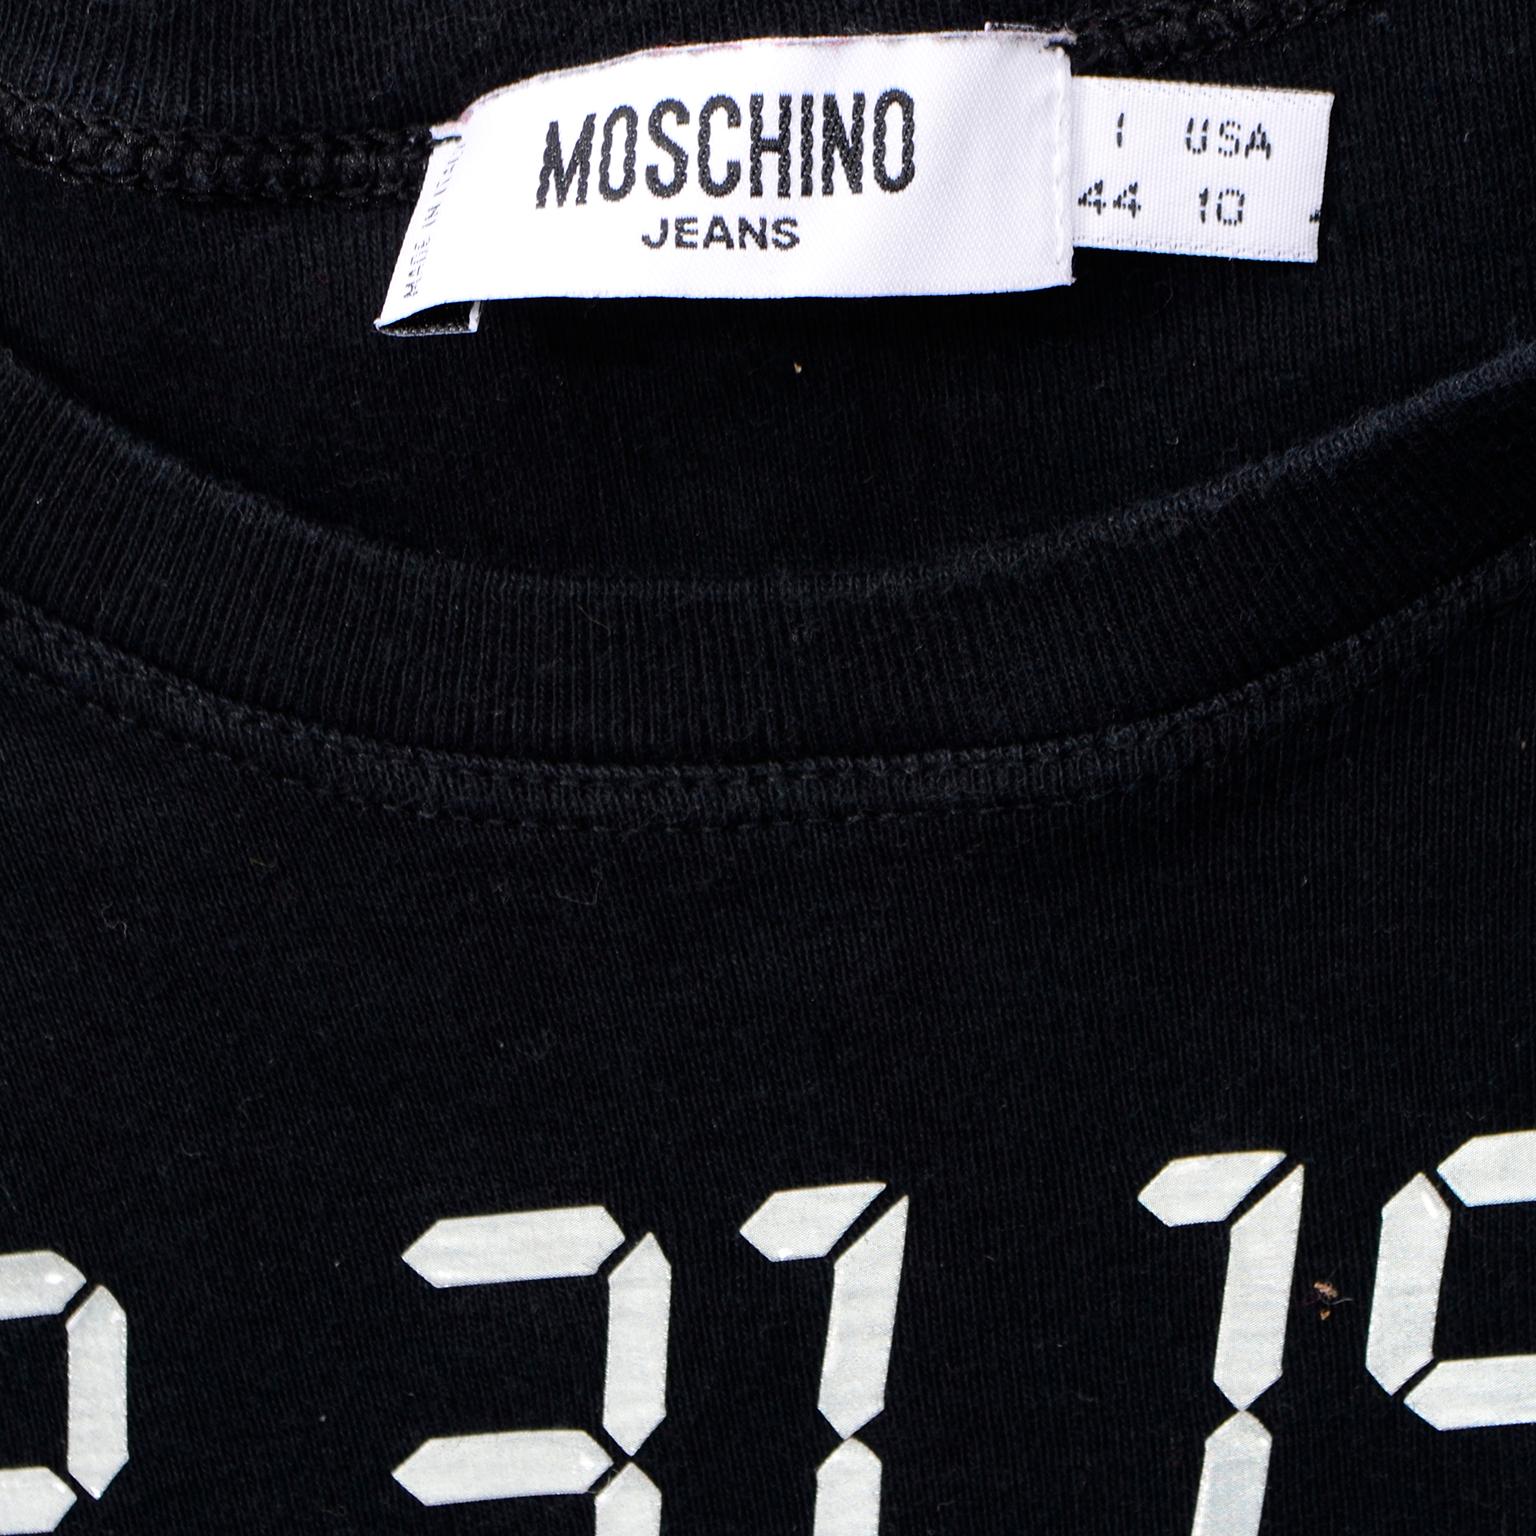 This is a rare,  incredible vintage black, long sleeve cotton novelty shirt from Moschino that was created as a humorous nod to the anticipation of the Y2K Bug. Leave it to Moschino to find a way to make something like Y2K a fashion statement! 

For